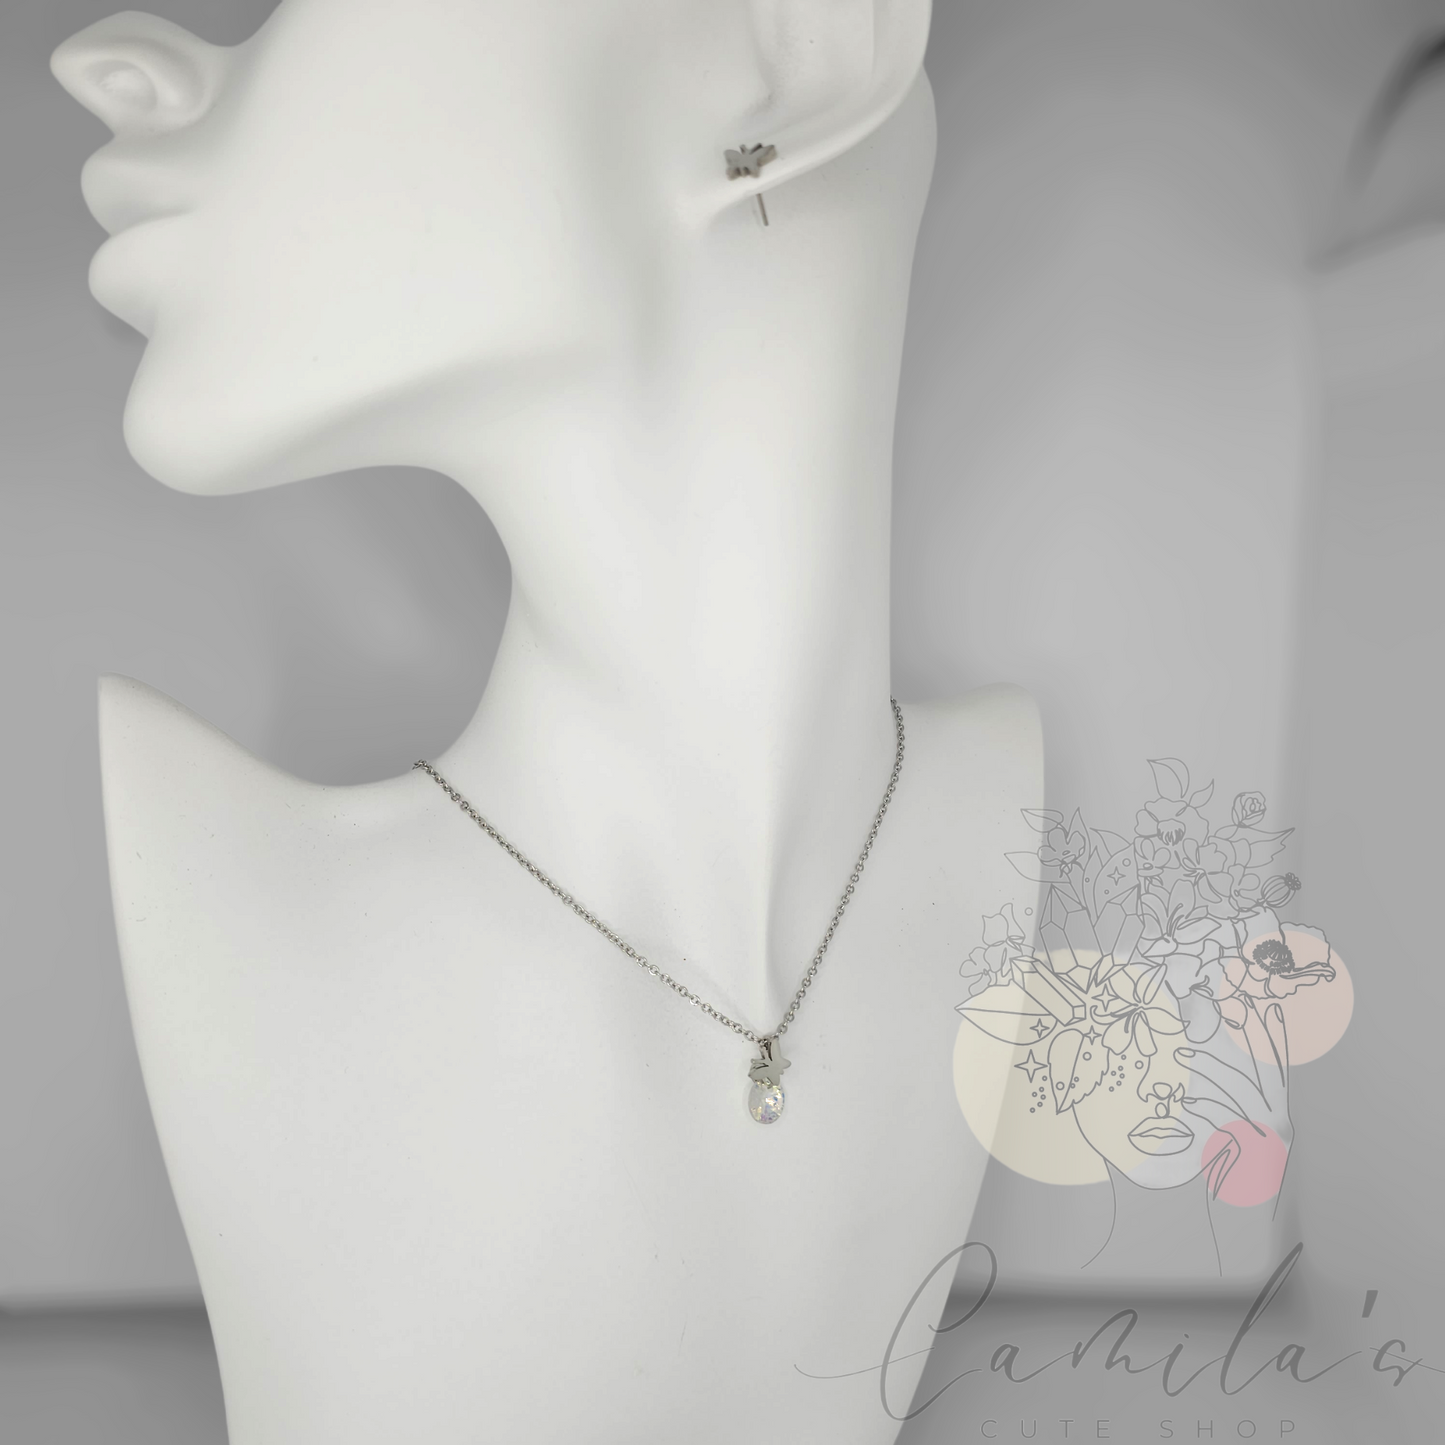 Butterfly Zirconia Necklace and earring set